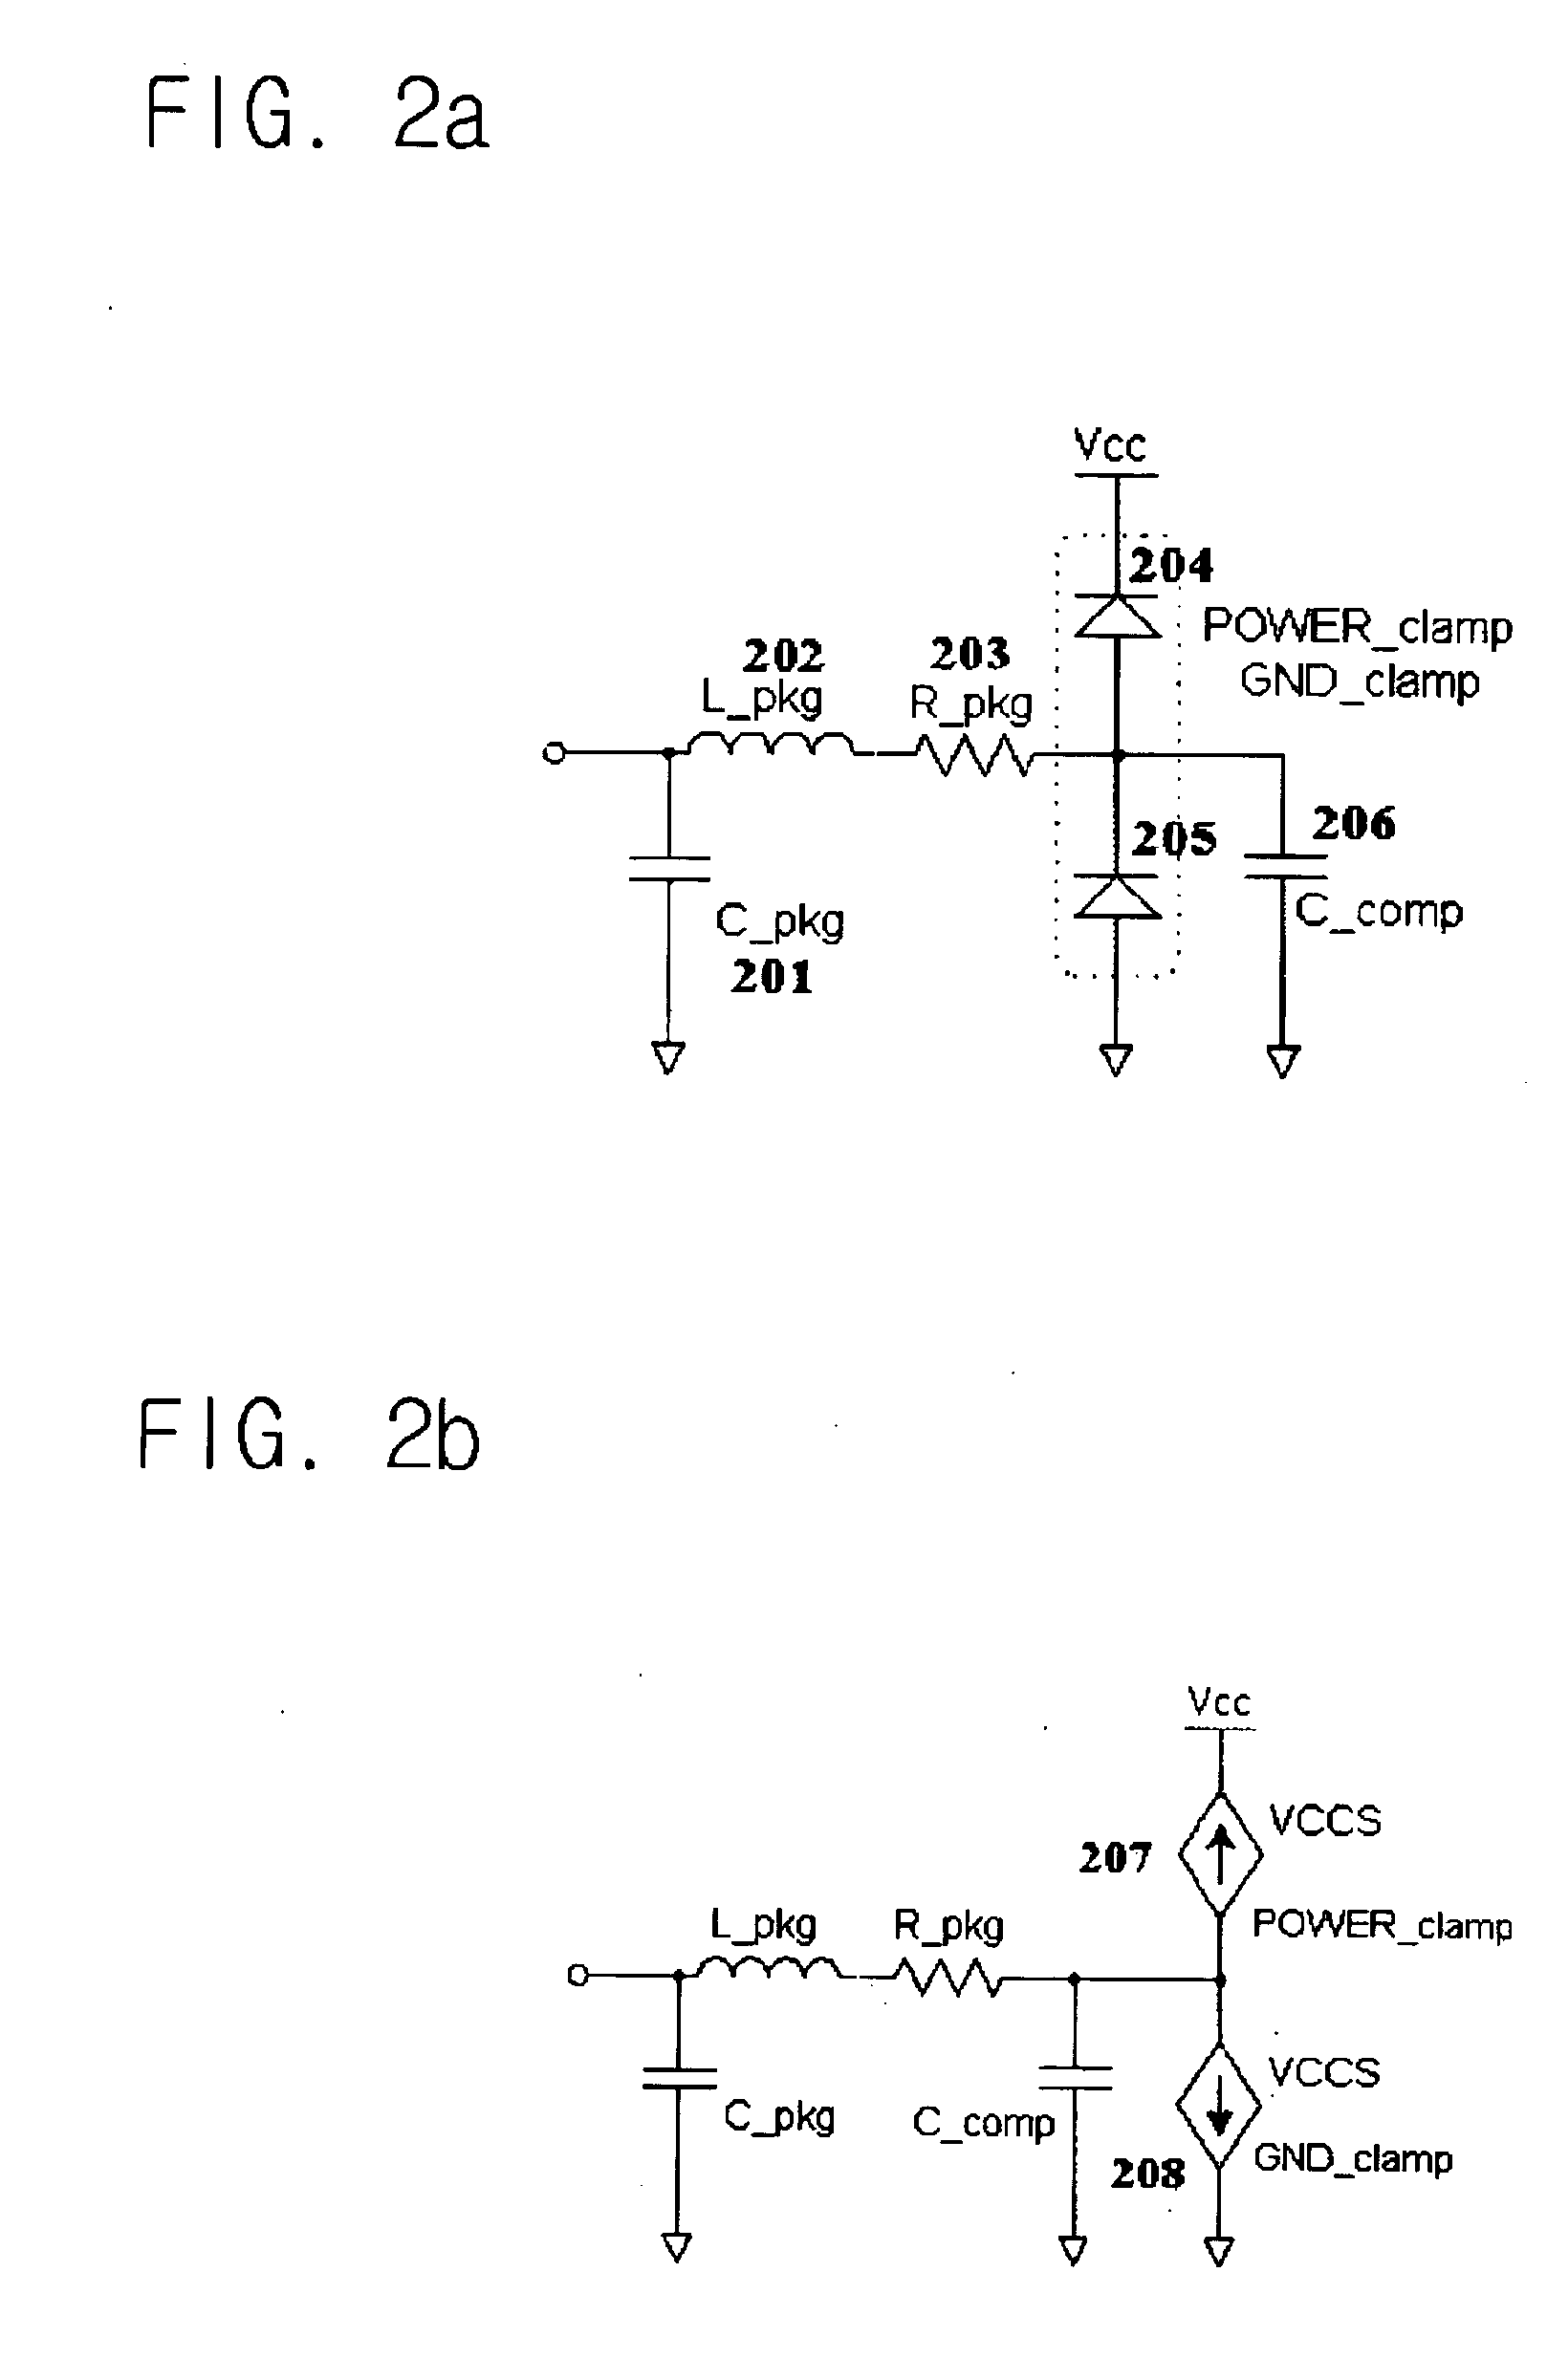 Method for converting IBIS model to spice behavioral model by extracting resistor and capacitor